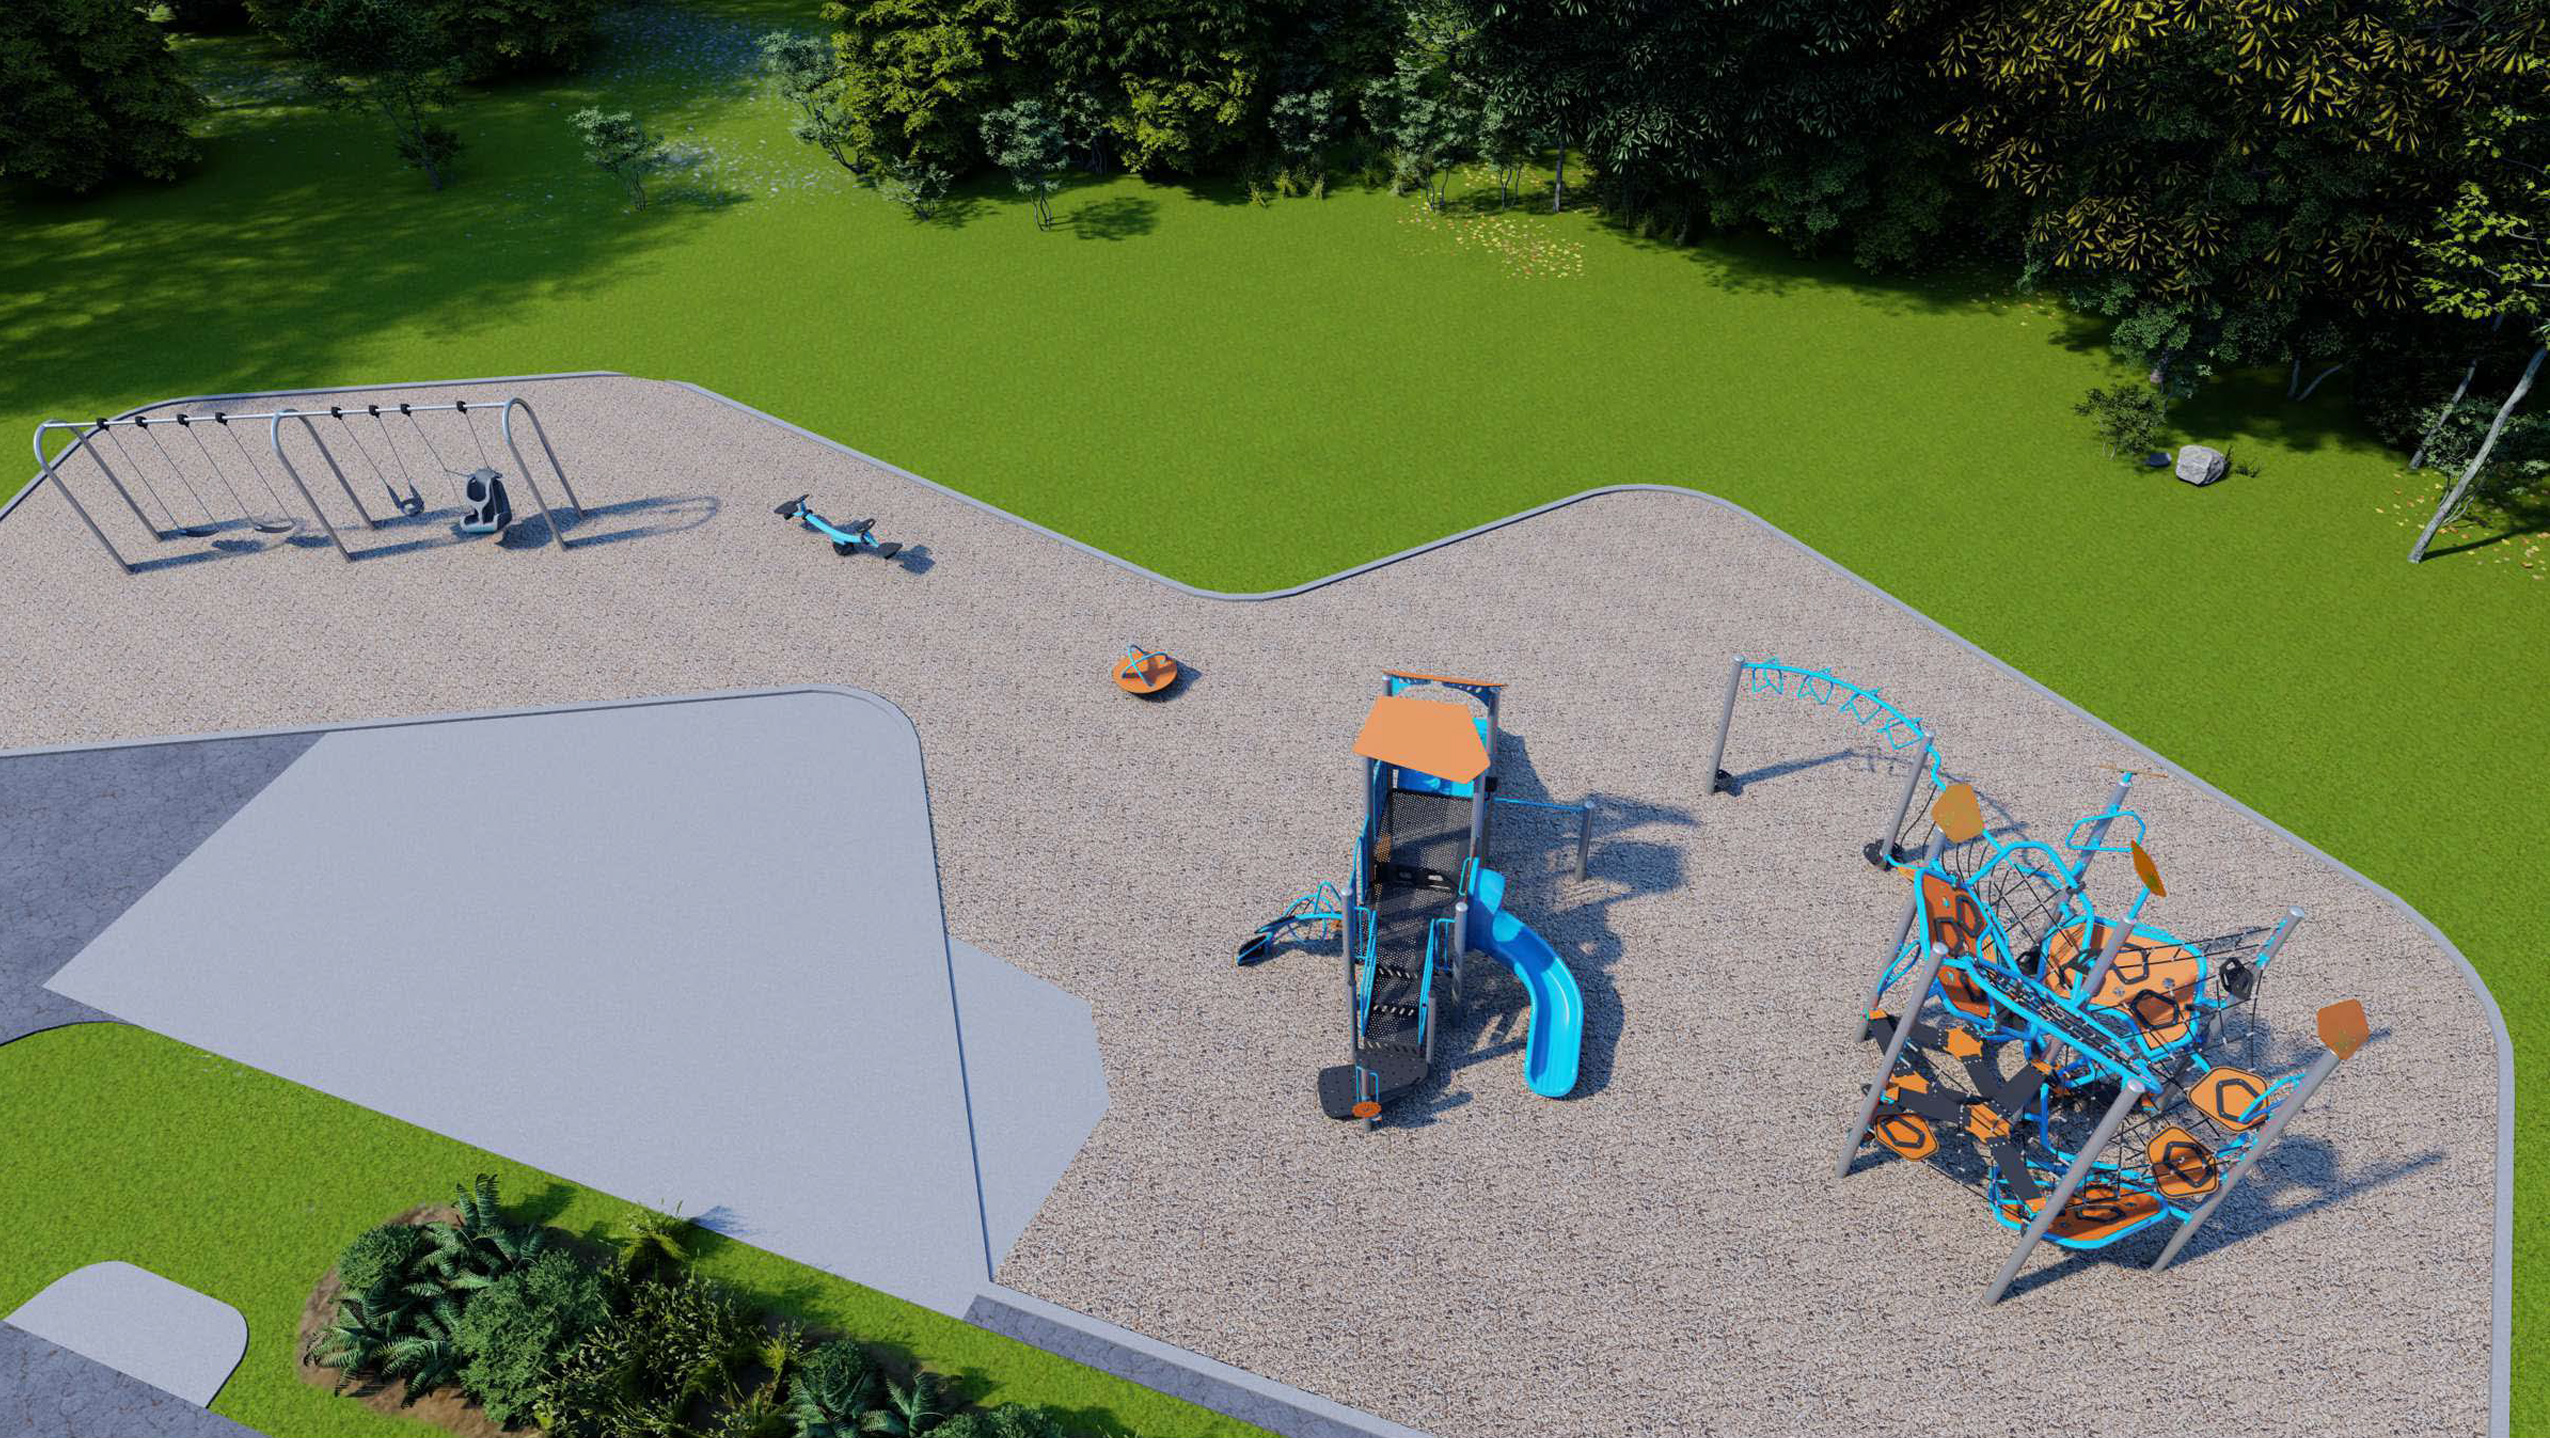 The rendering of playground Design C. From left to right: swings, teeter-totter, spinner toy, junior play structure, senior climbing structure. Design is further described following the image.